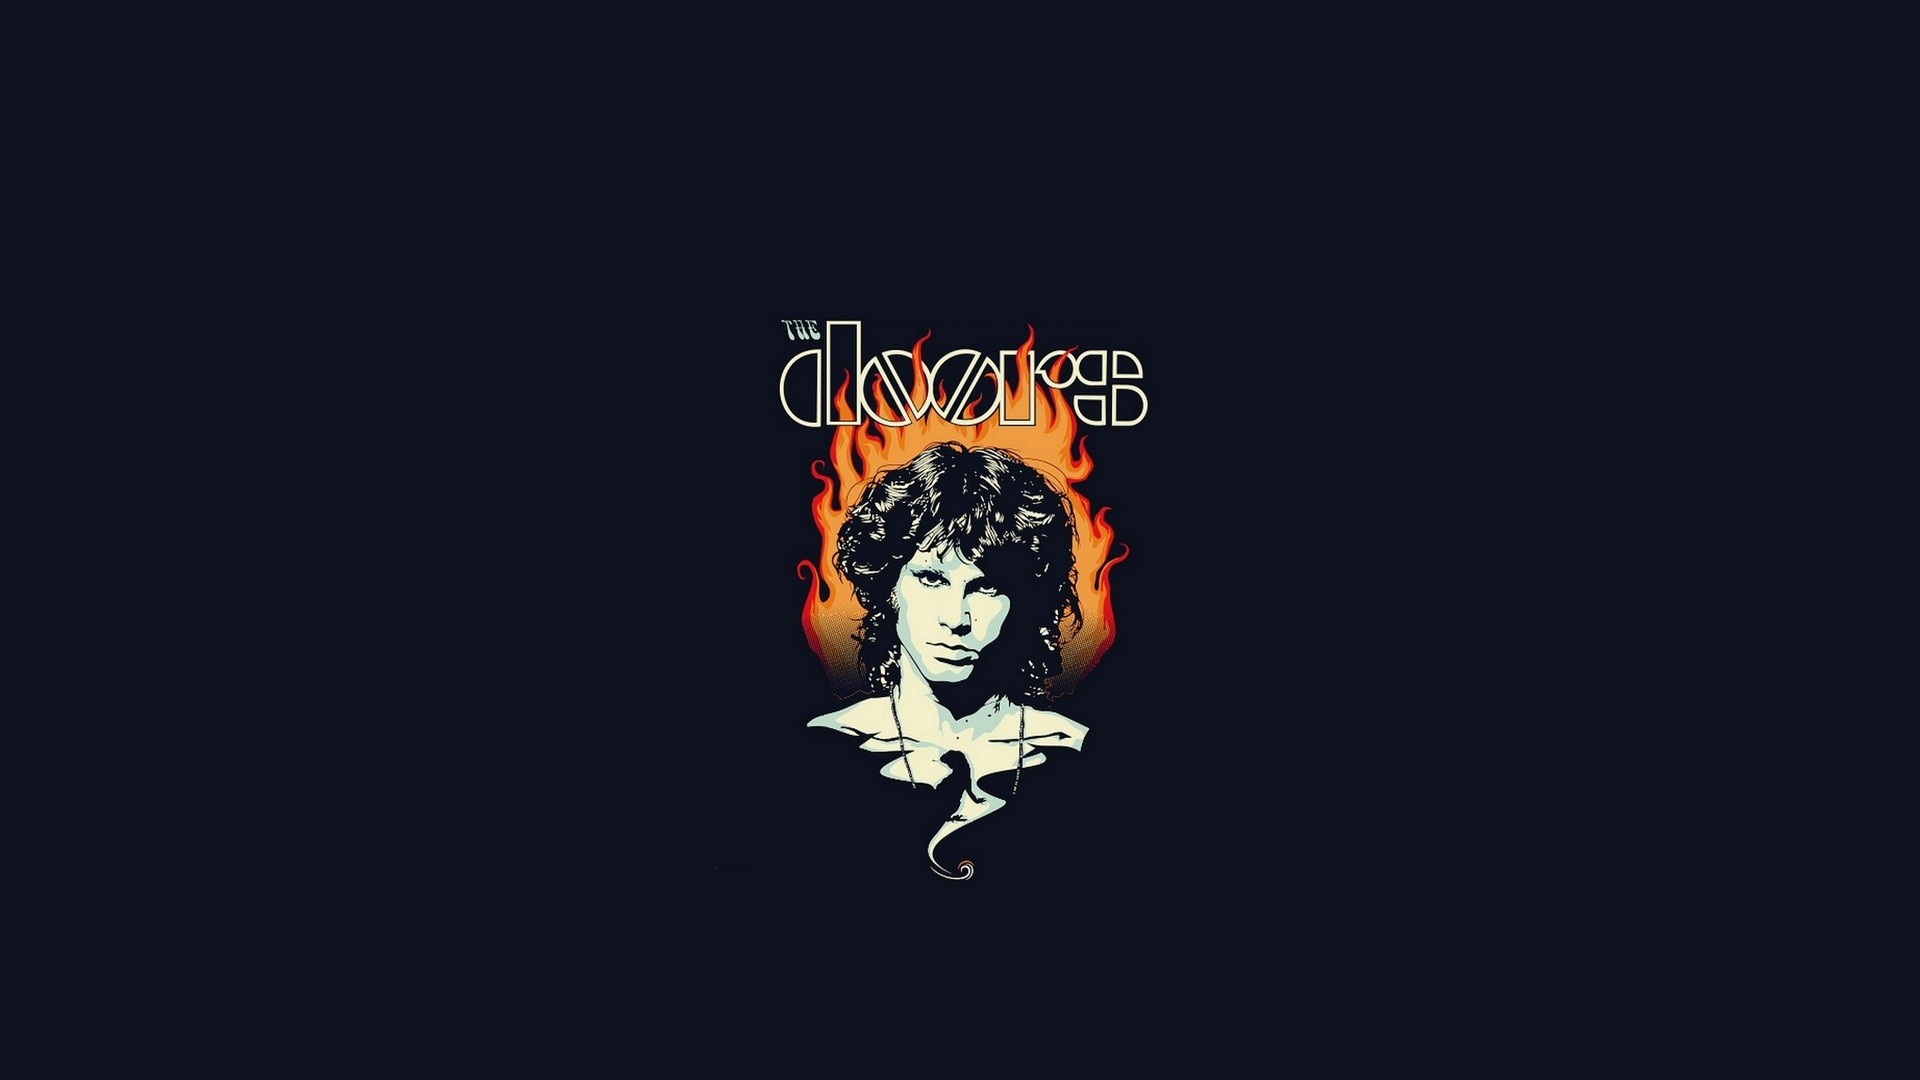 Jim Morrison Wallpaper Awesome Pictures And